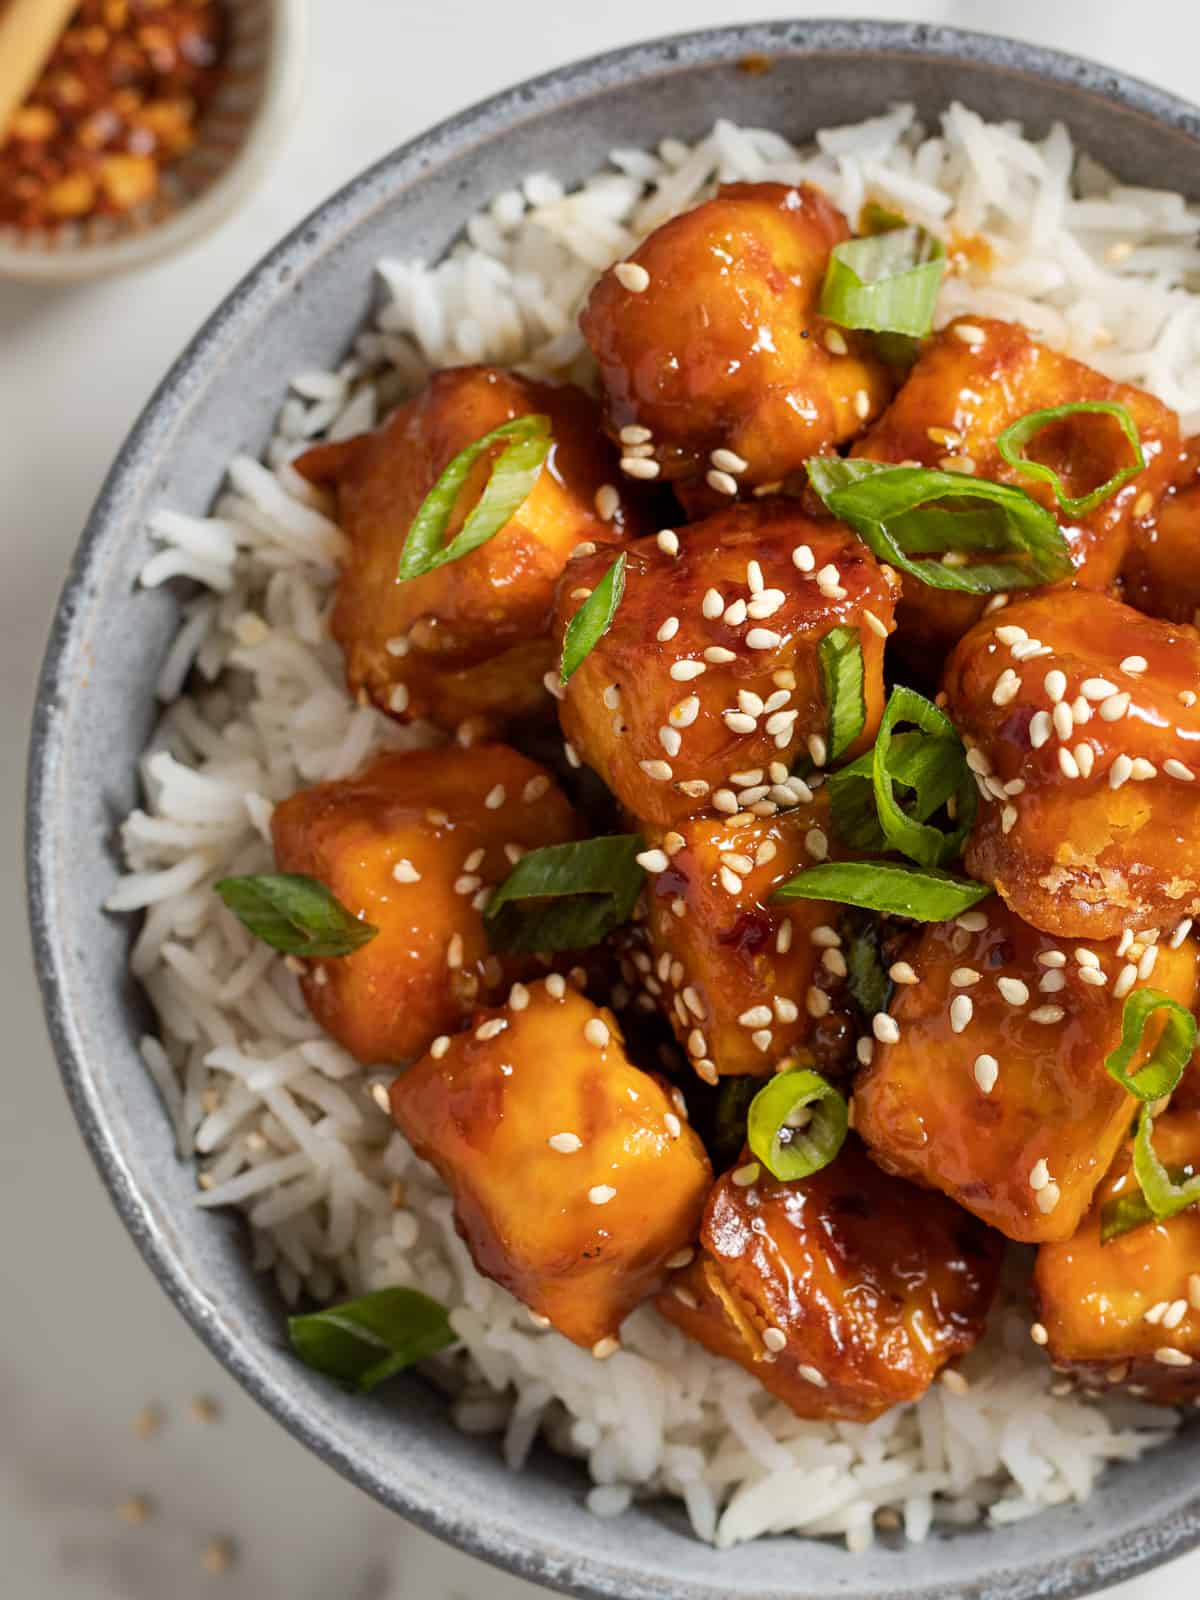 Baked tofu cubes covered in glossy teriyaki sauce in a bowl of rice.